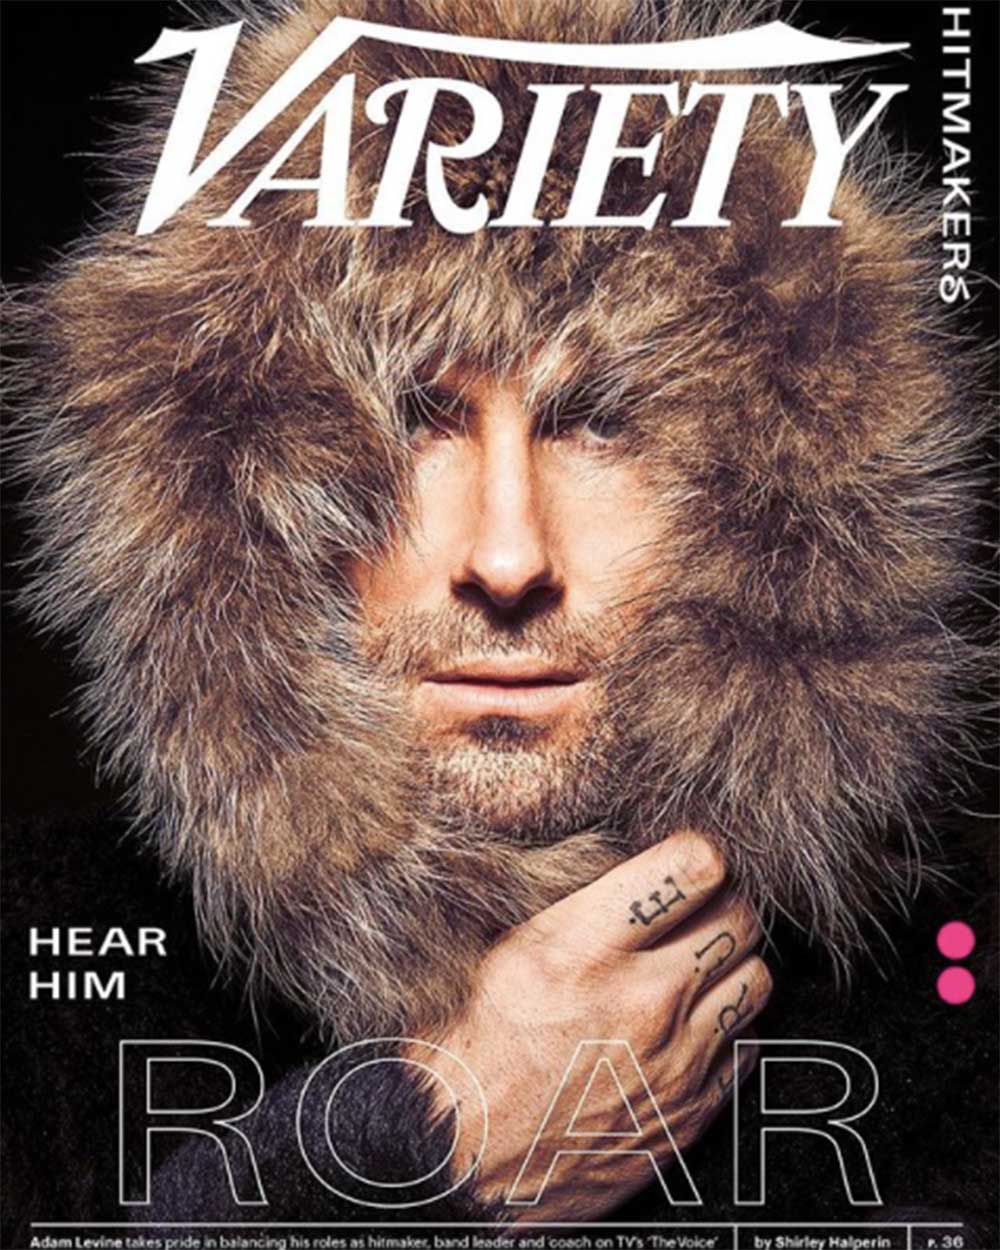 『Variety』の表紙を飾ったアダム・レヴィーン（画像は『Variety Magazine　2018年11月27日付Instagram「COVER STORY：Introducing Variety’s ＃Hitmaker of the year. Adam Levine opens up about dealing with the loss of his friend and manager, Jordan Feldstein, and how he has taken control of his career. Full profile at link in bio.」（＠guyaroch）』のスクリーンショット）